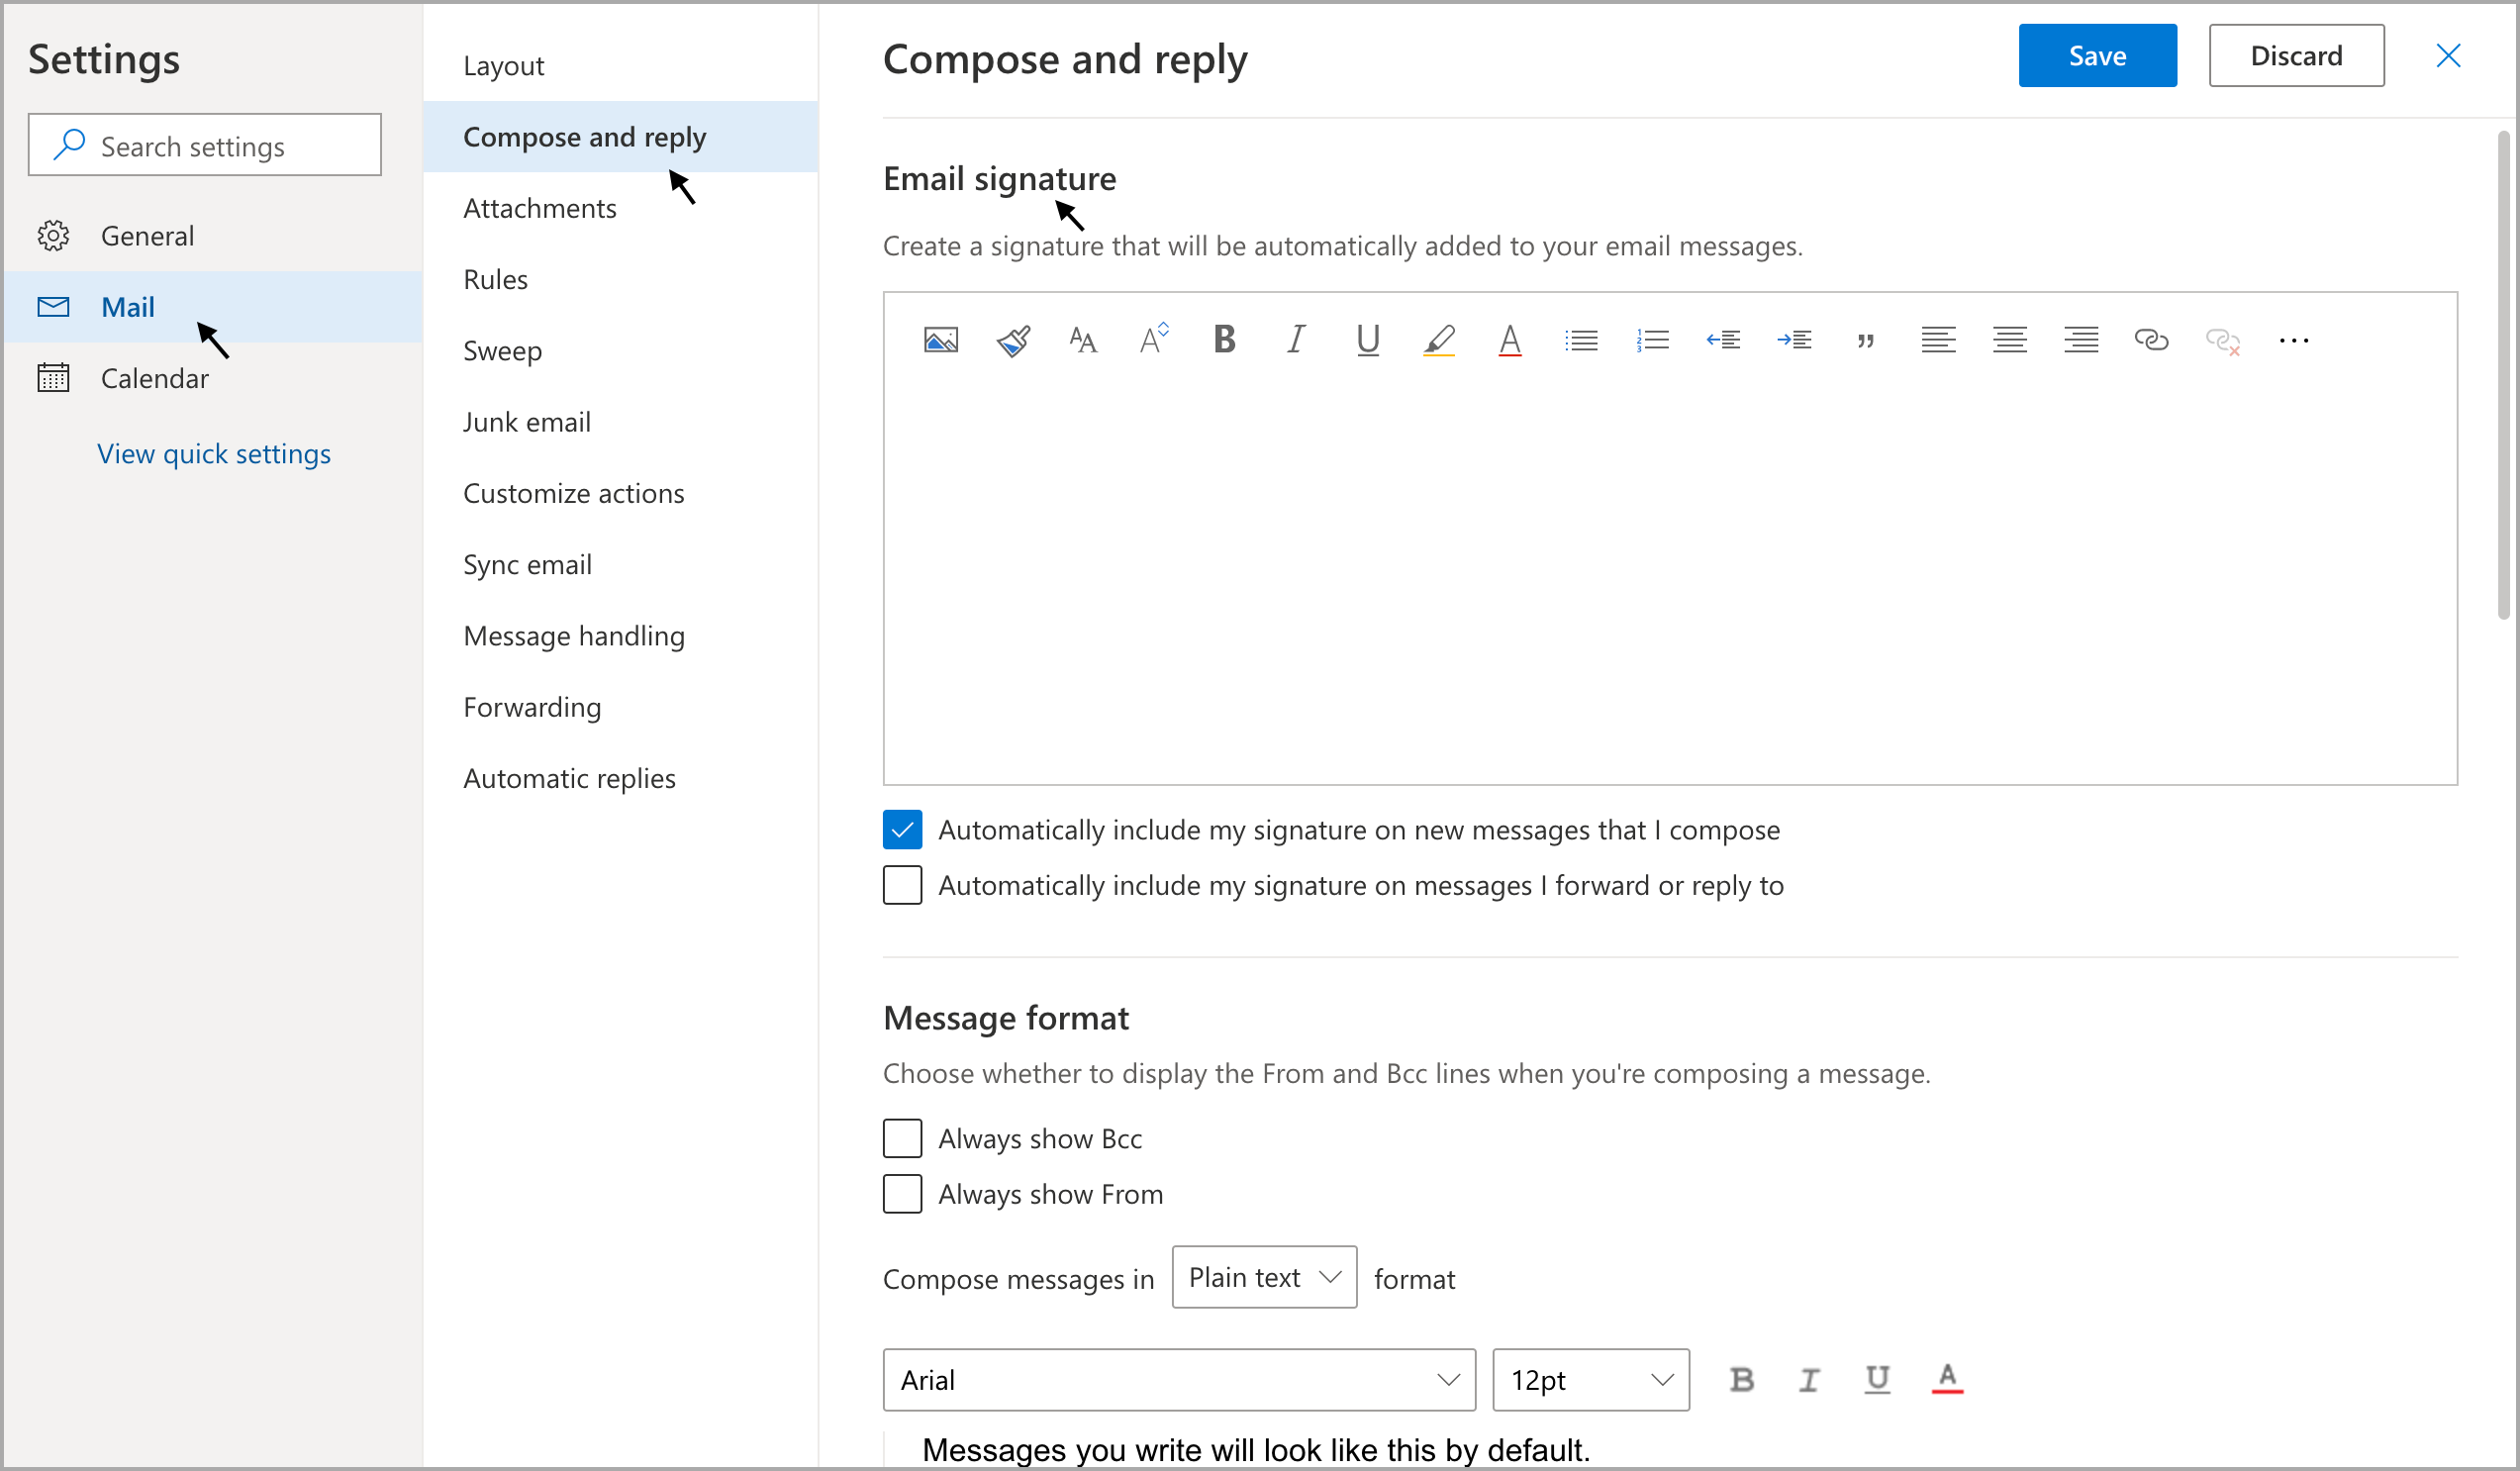 how to add a signature in outlook 360 online